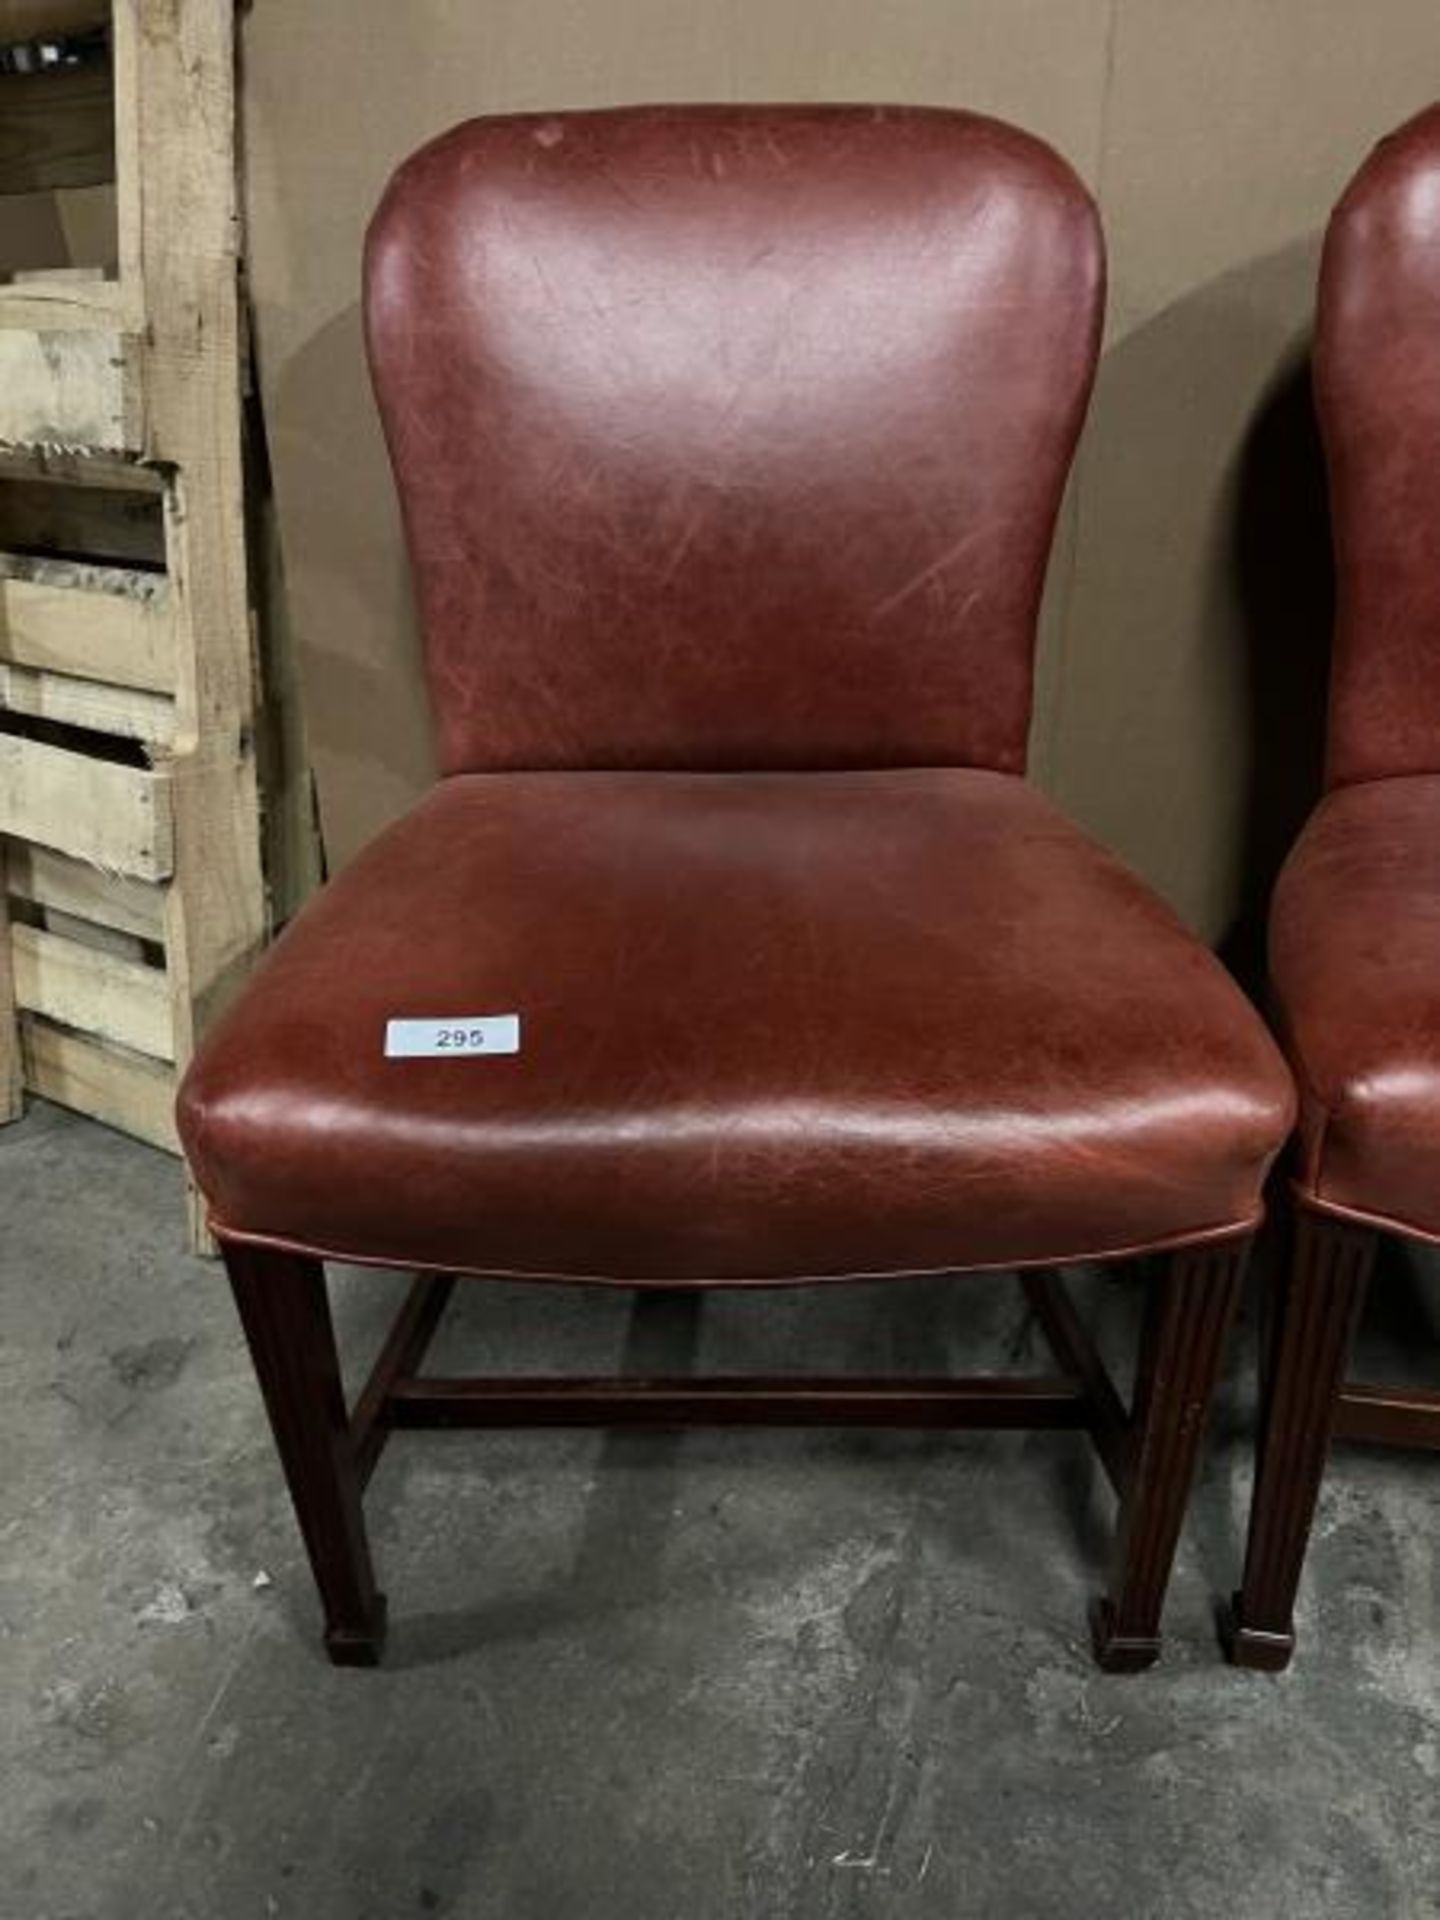 Pair of Red Vinyl Chairs; Located in Mill Building - Image 4 of 20